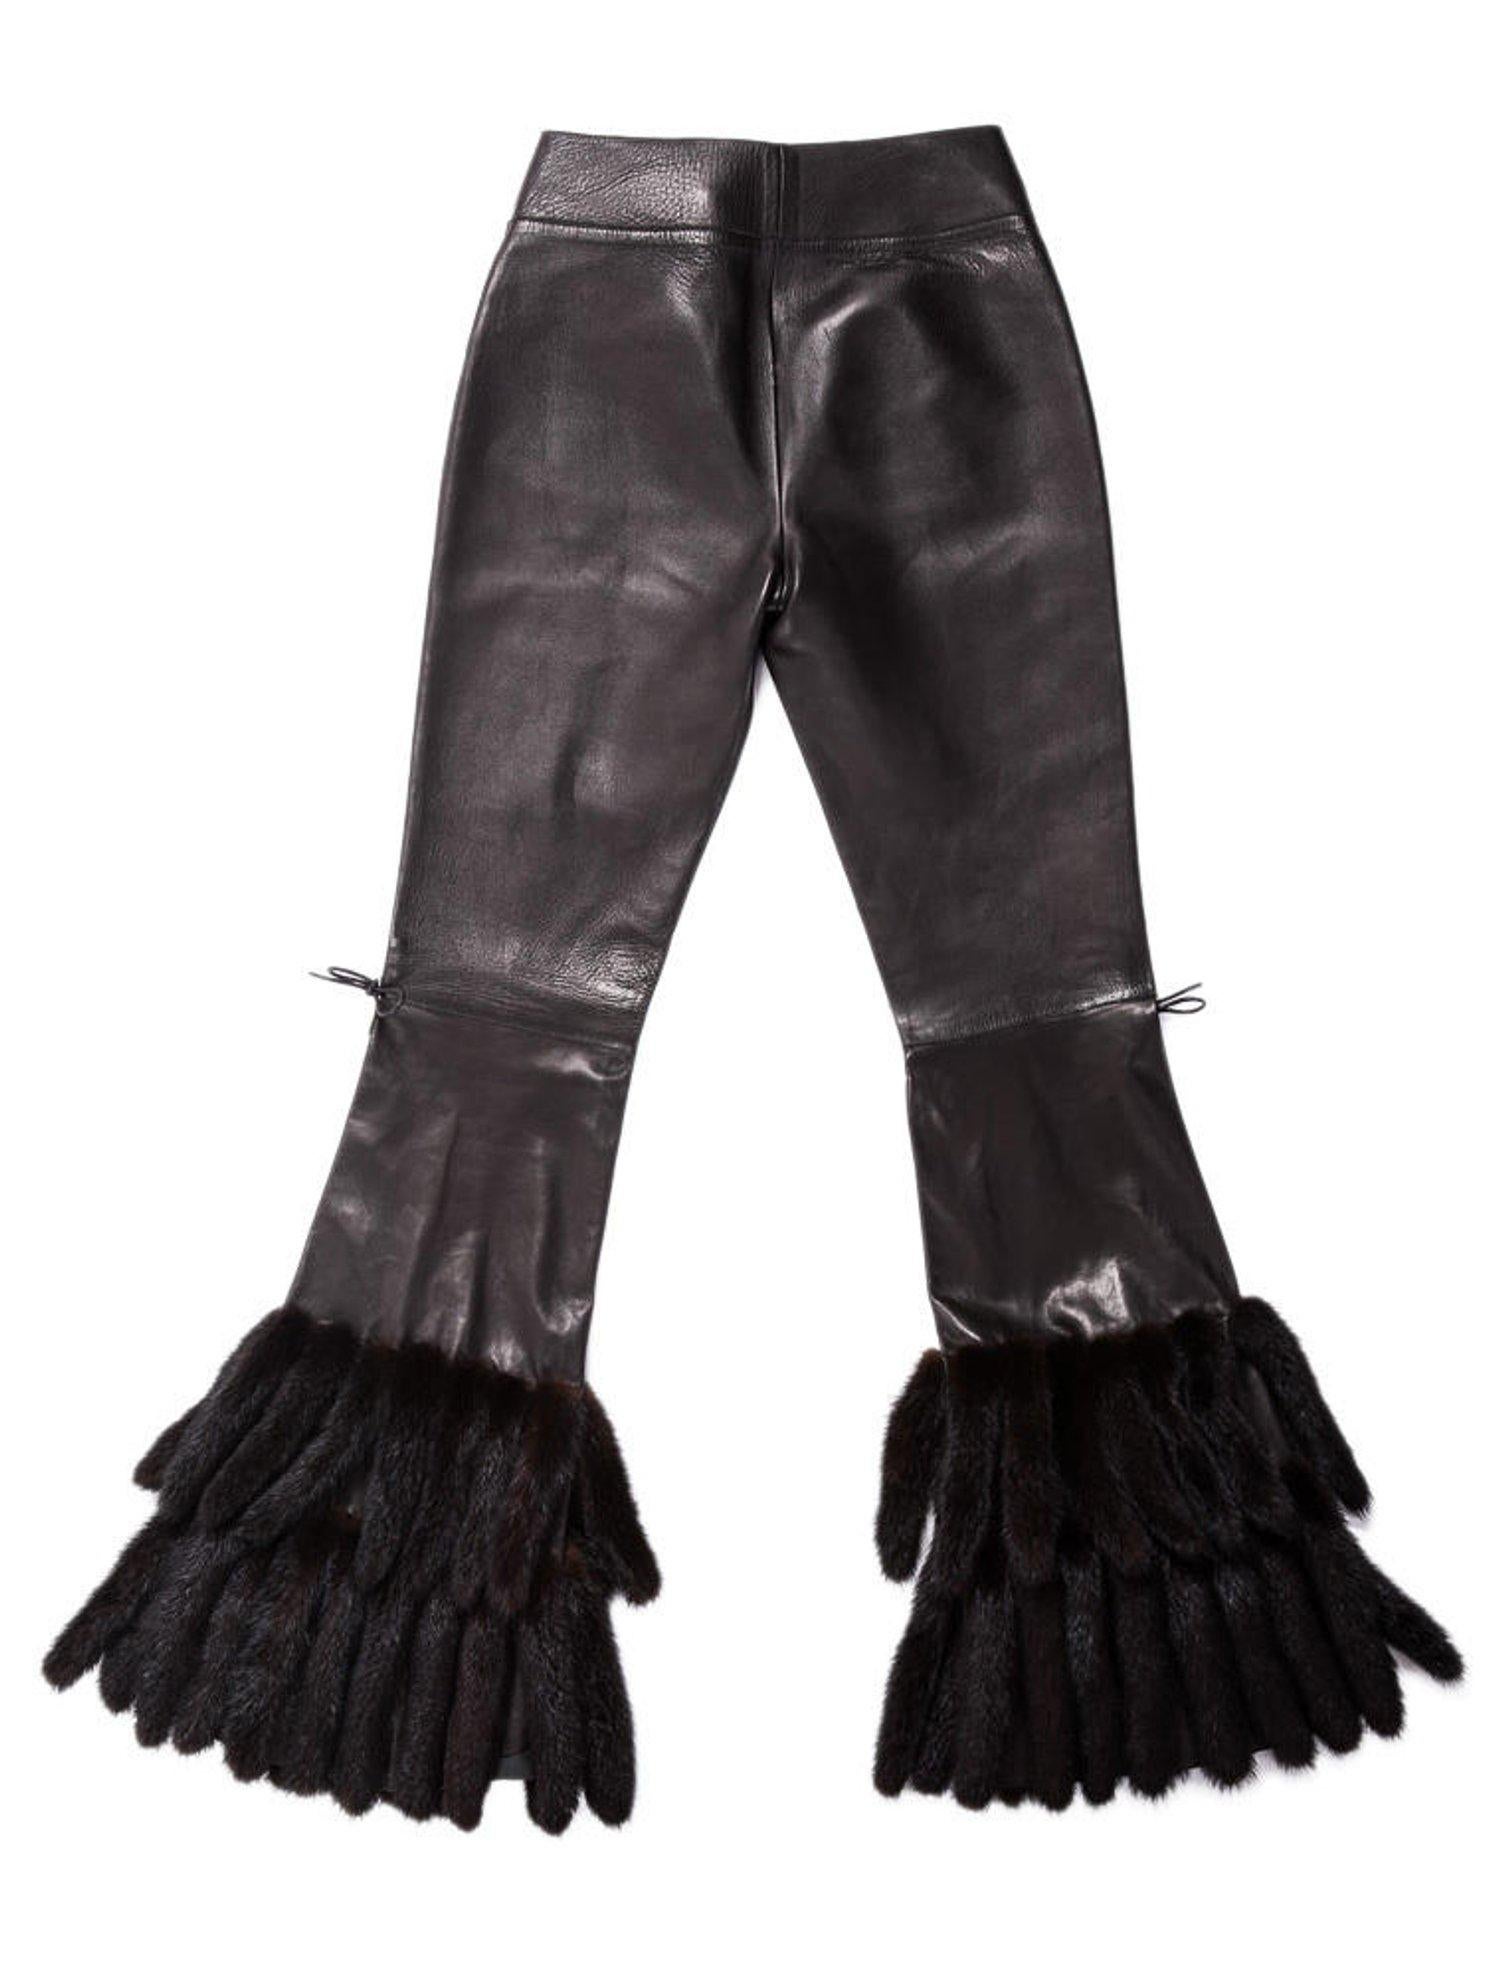 TOM FORD for GUCCI
F/W 1999 
  
Highly sought after GUCCI 

 LEATHER PANTS with MINK FUR 

 Extremely RARE !

Made in Italy

Impossible to get! Highly collectible! 

IT Size 38 - US 4